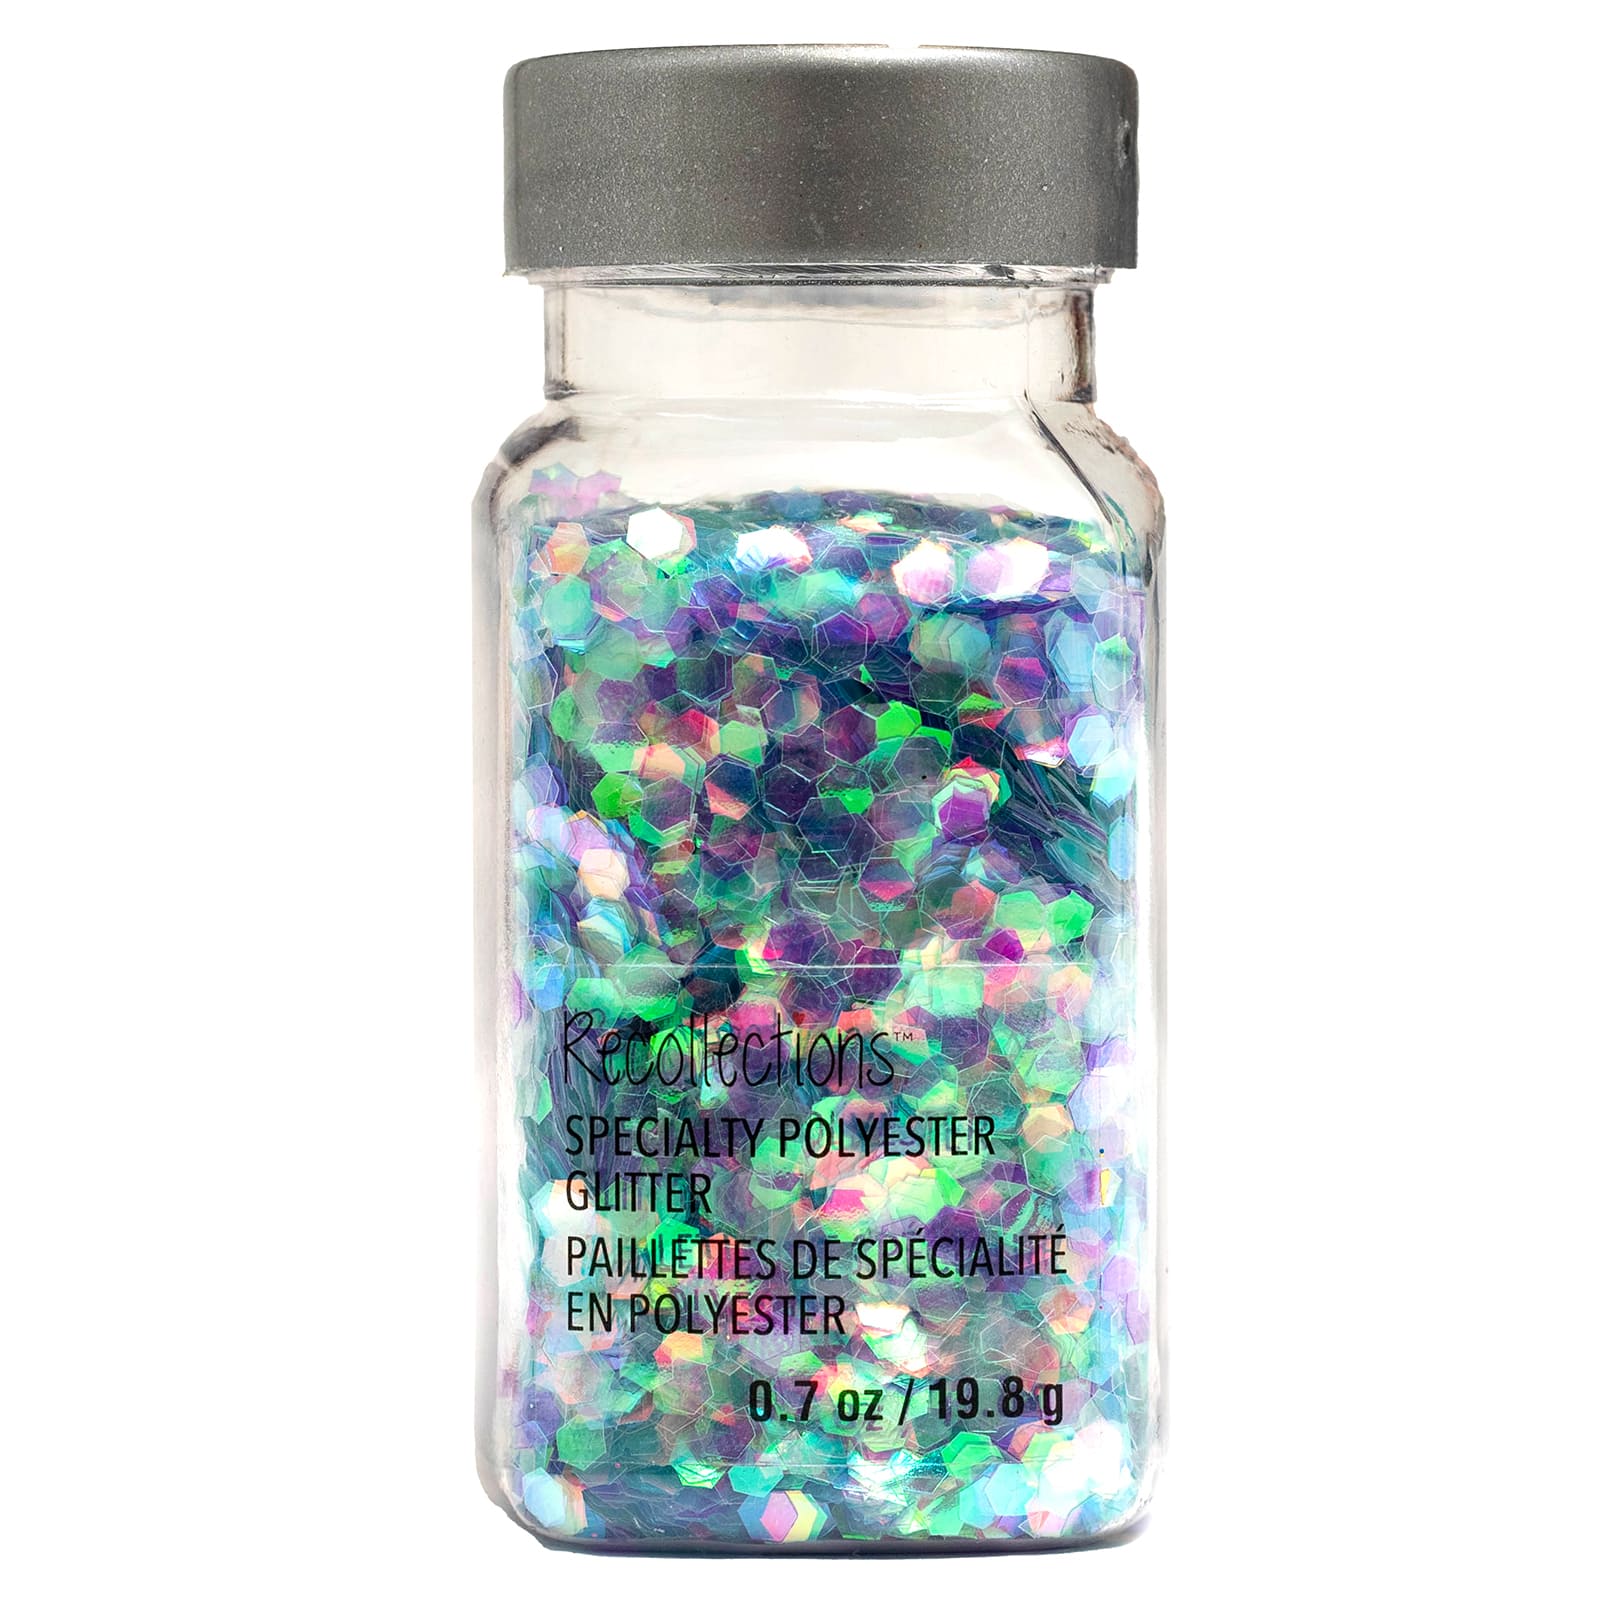 Iridescent Mix Specialty Glitter by Recollections™, 0.7oz.